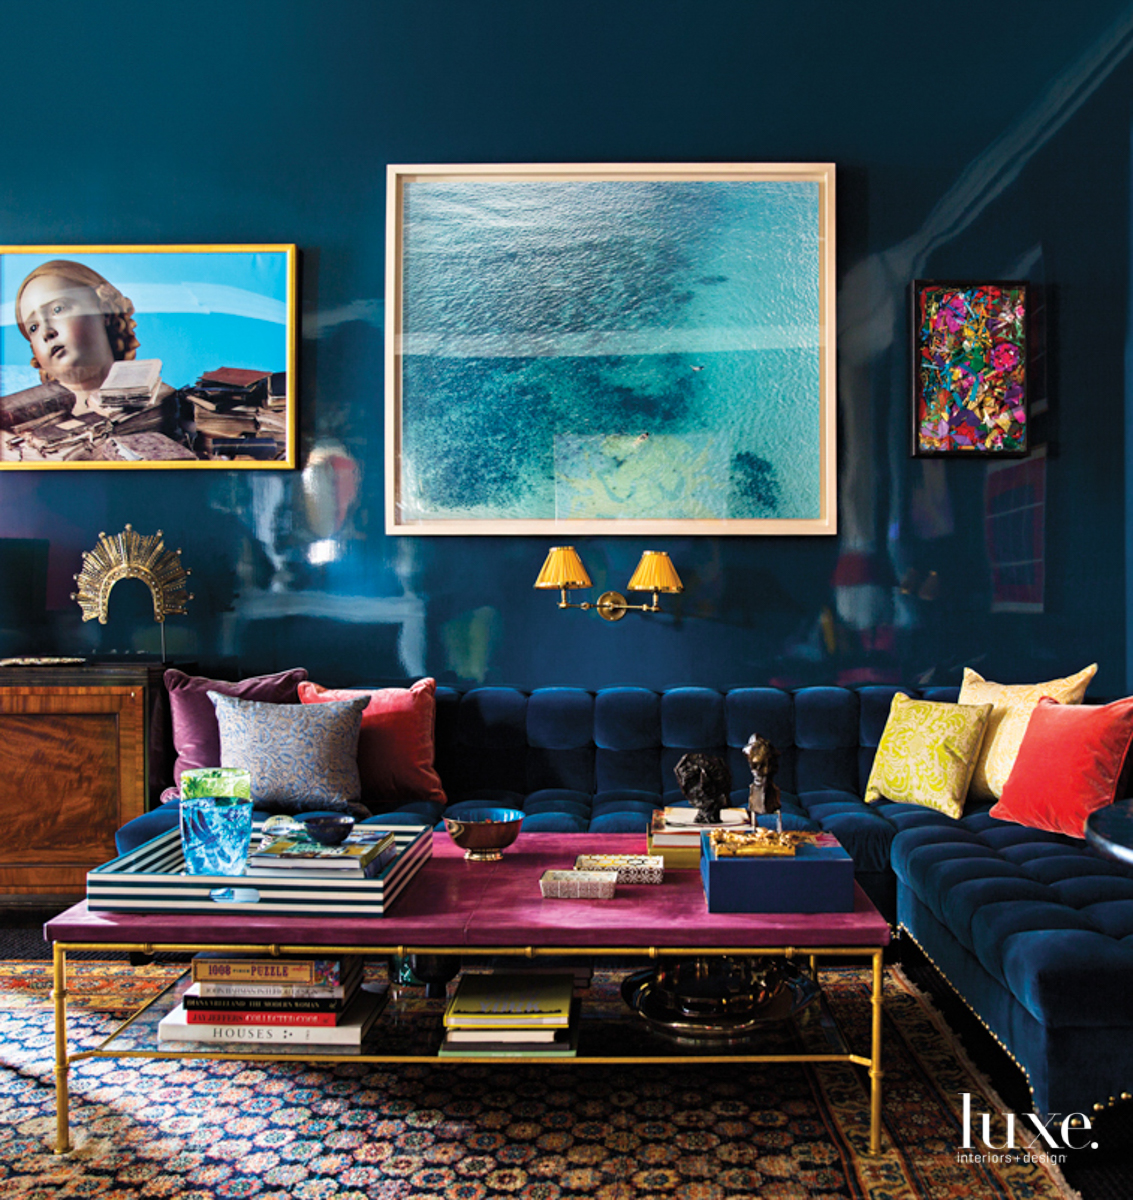 dark blue living room with installation art and magenta table representing maximalist interior designs